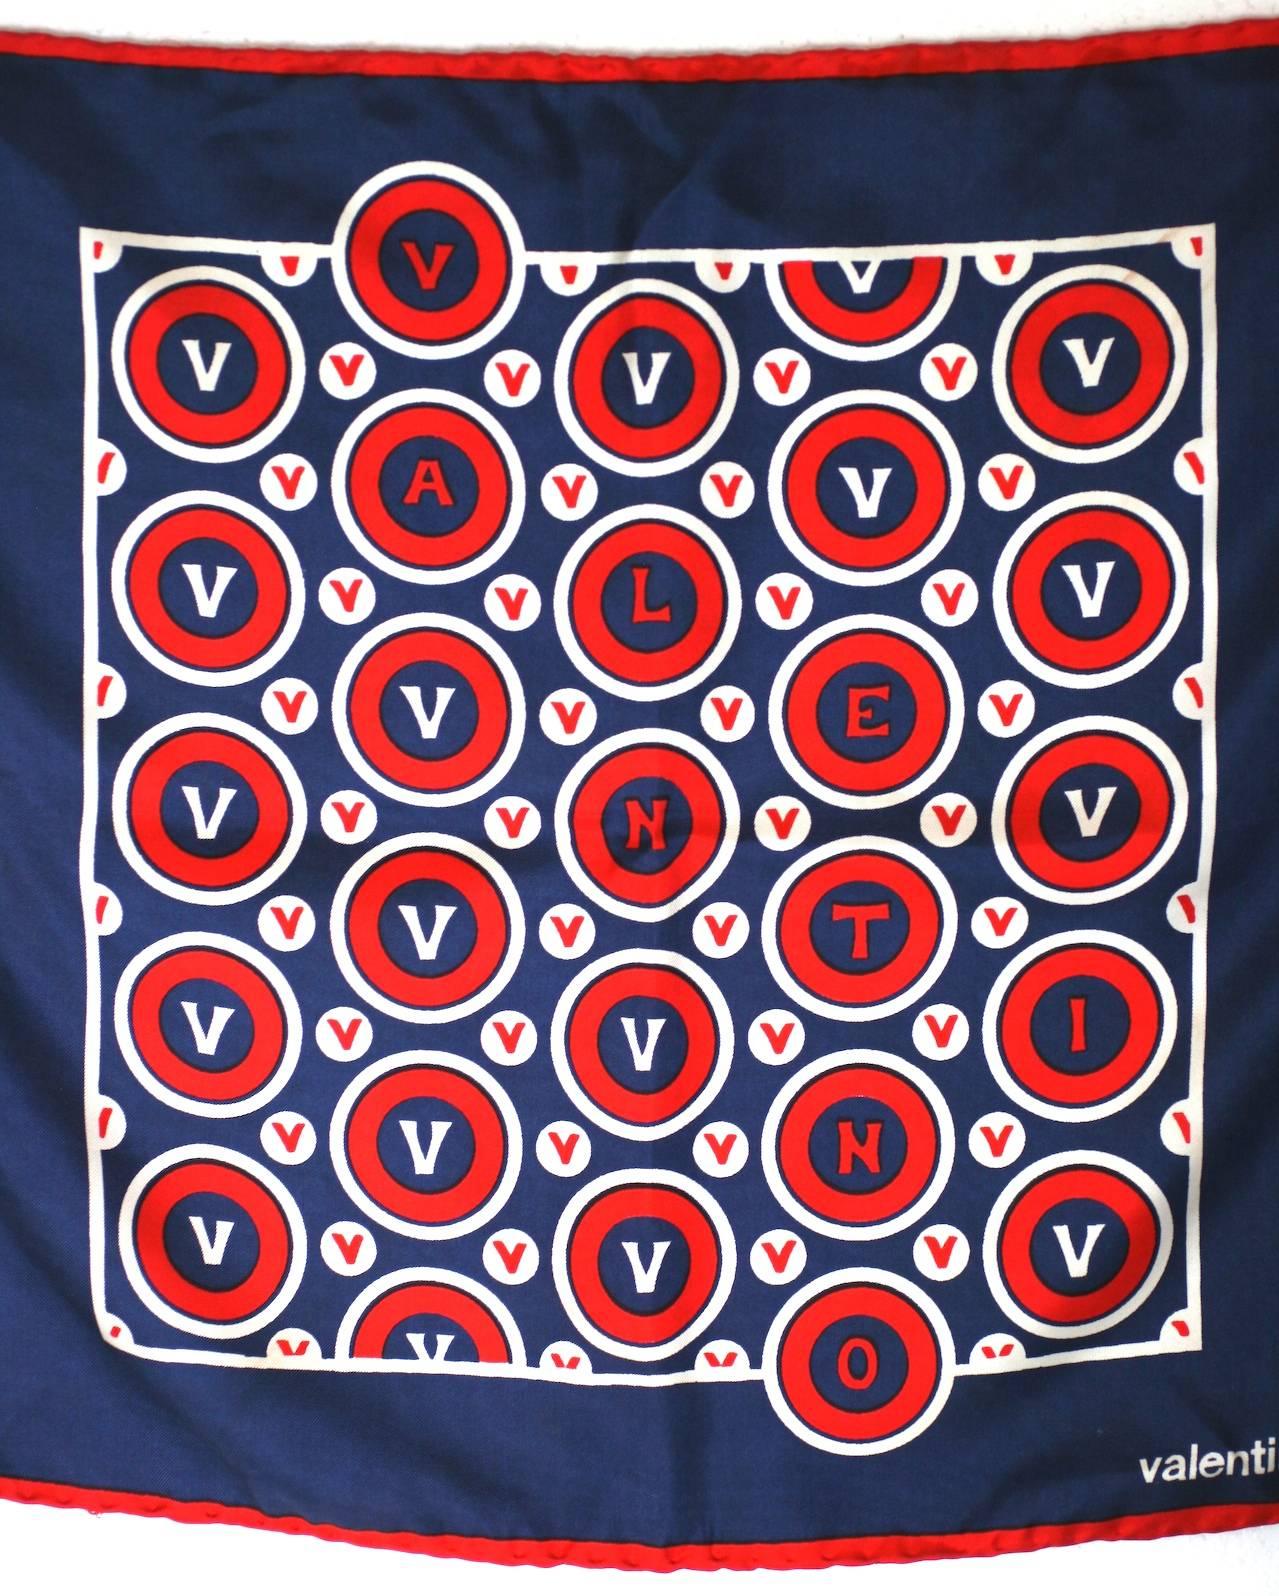 Valentino Silk Twill Logo Scarf in graphic red, white and blue. This archival design from the 1970's,  has recently been reintroduced by Valentino for its RTW collections.
1970's Italy.  16